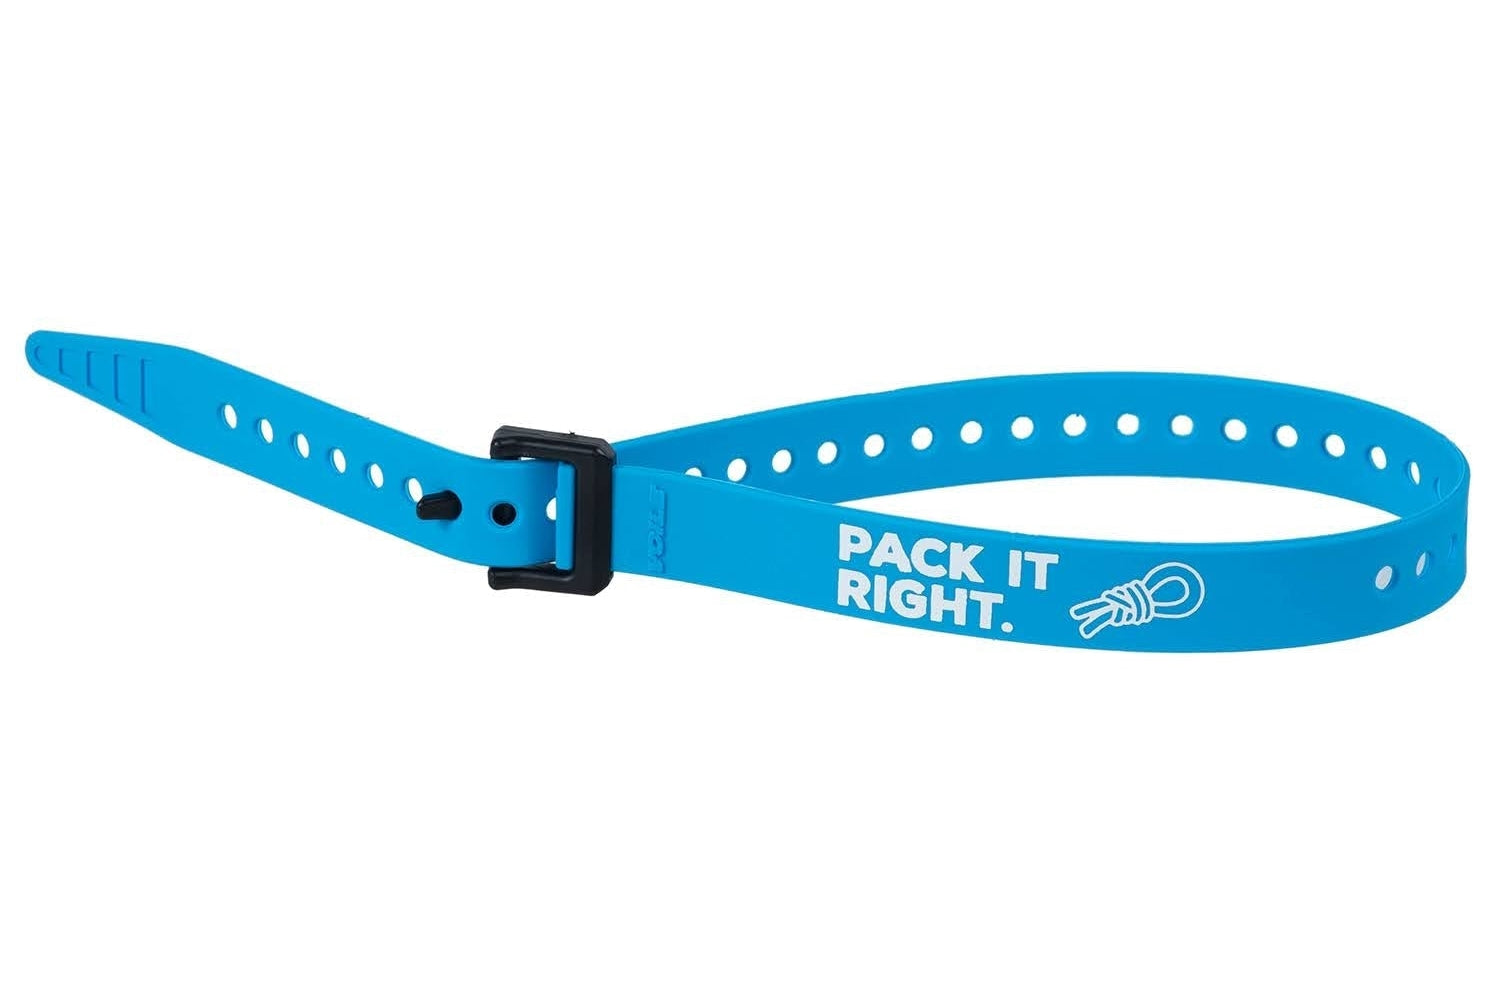 RAL Pack It Right Straps